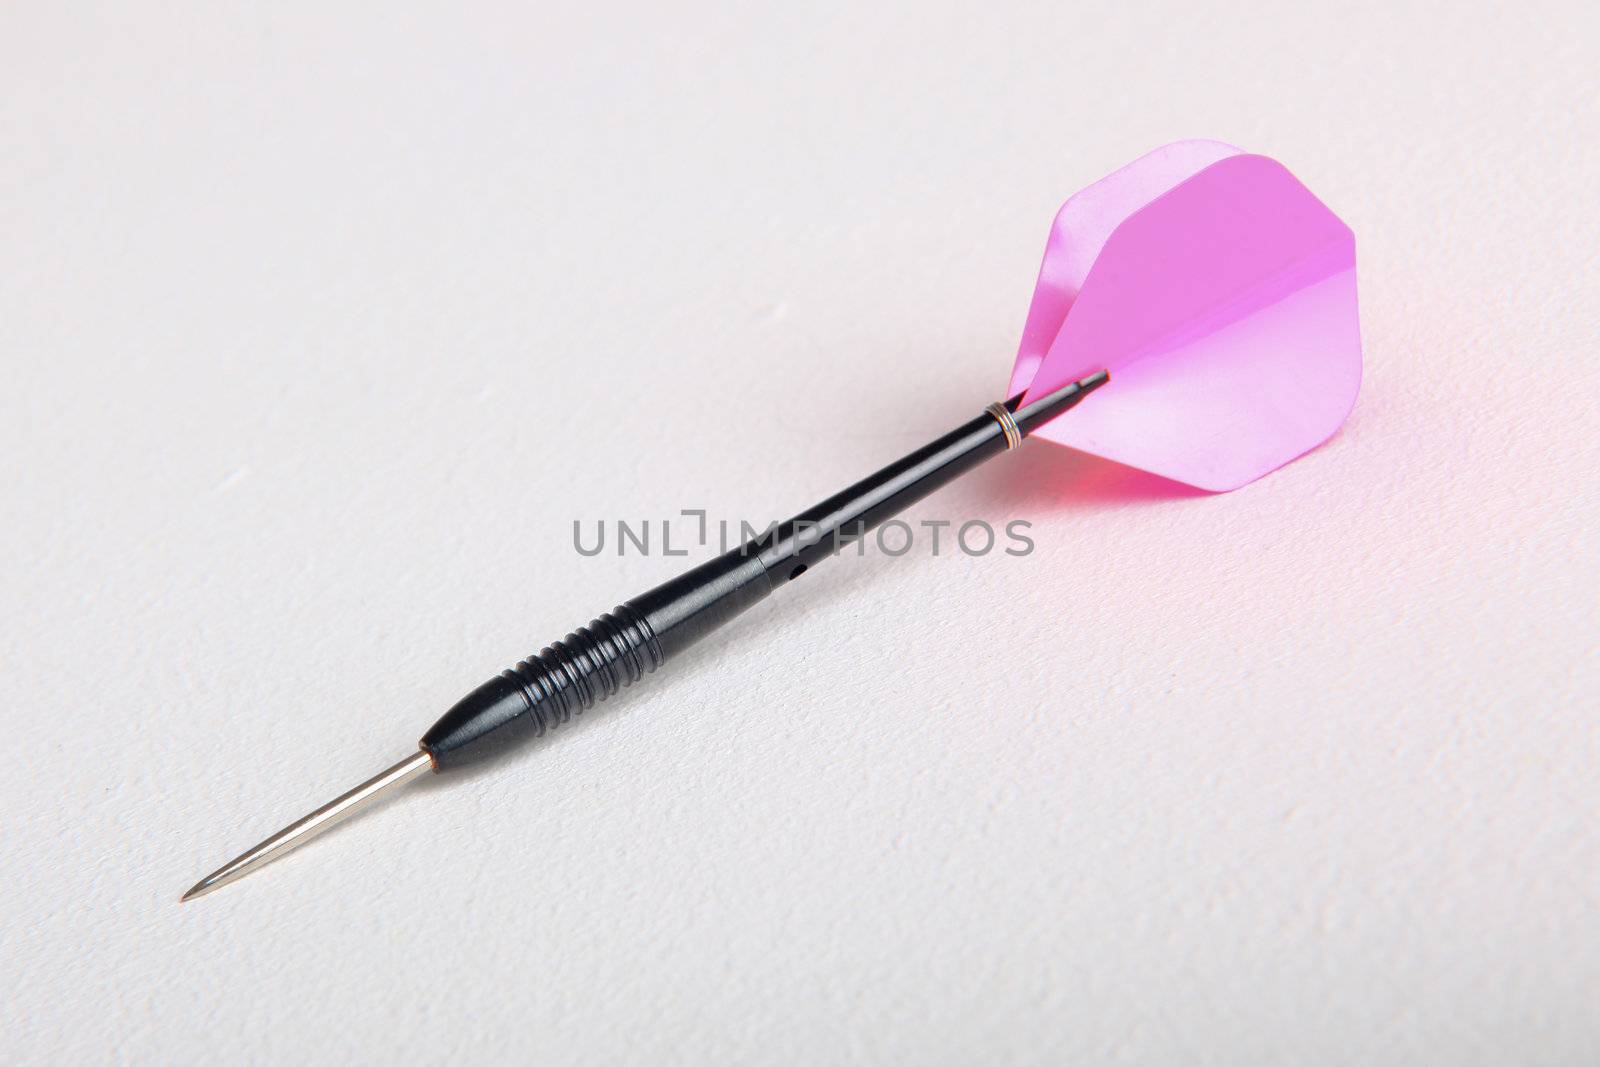 Isolated Image Of A Black Darts Arrow With Pink Wings